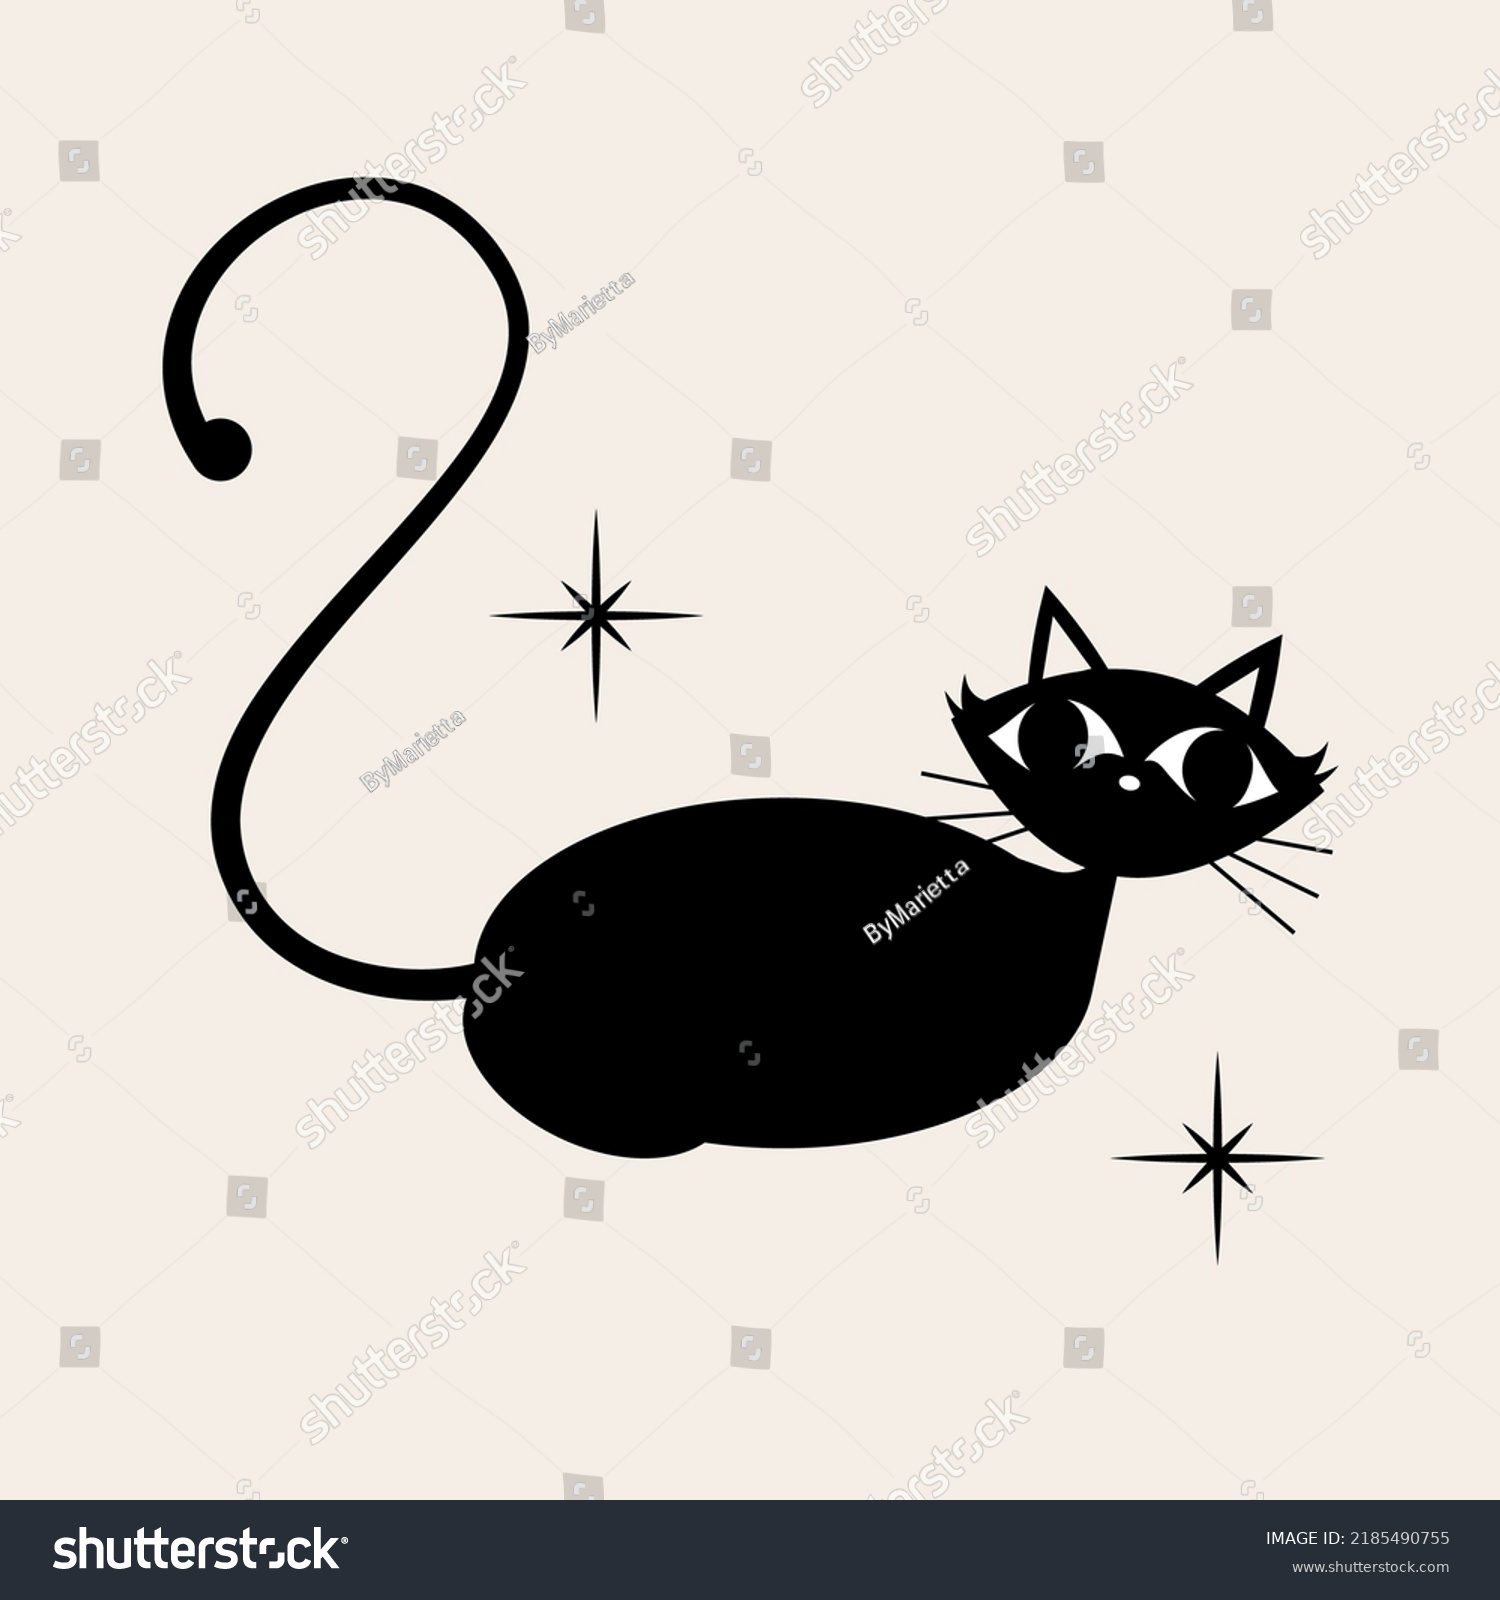 SVG of 1950s Mid Century Modern Atomic Black Cats and Starbursts svg